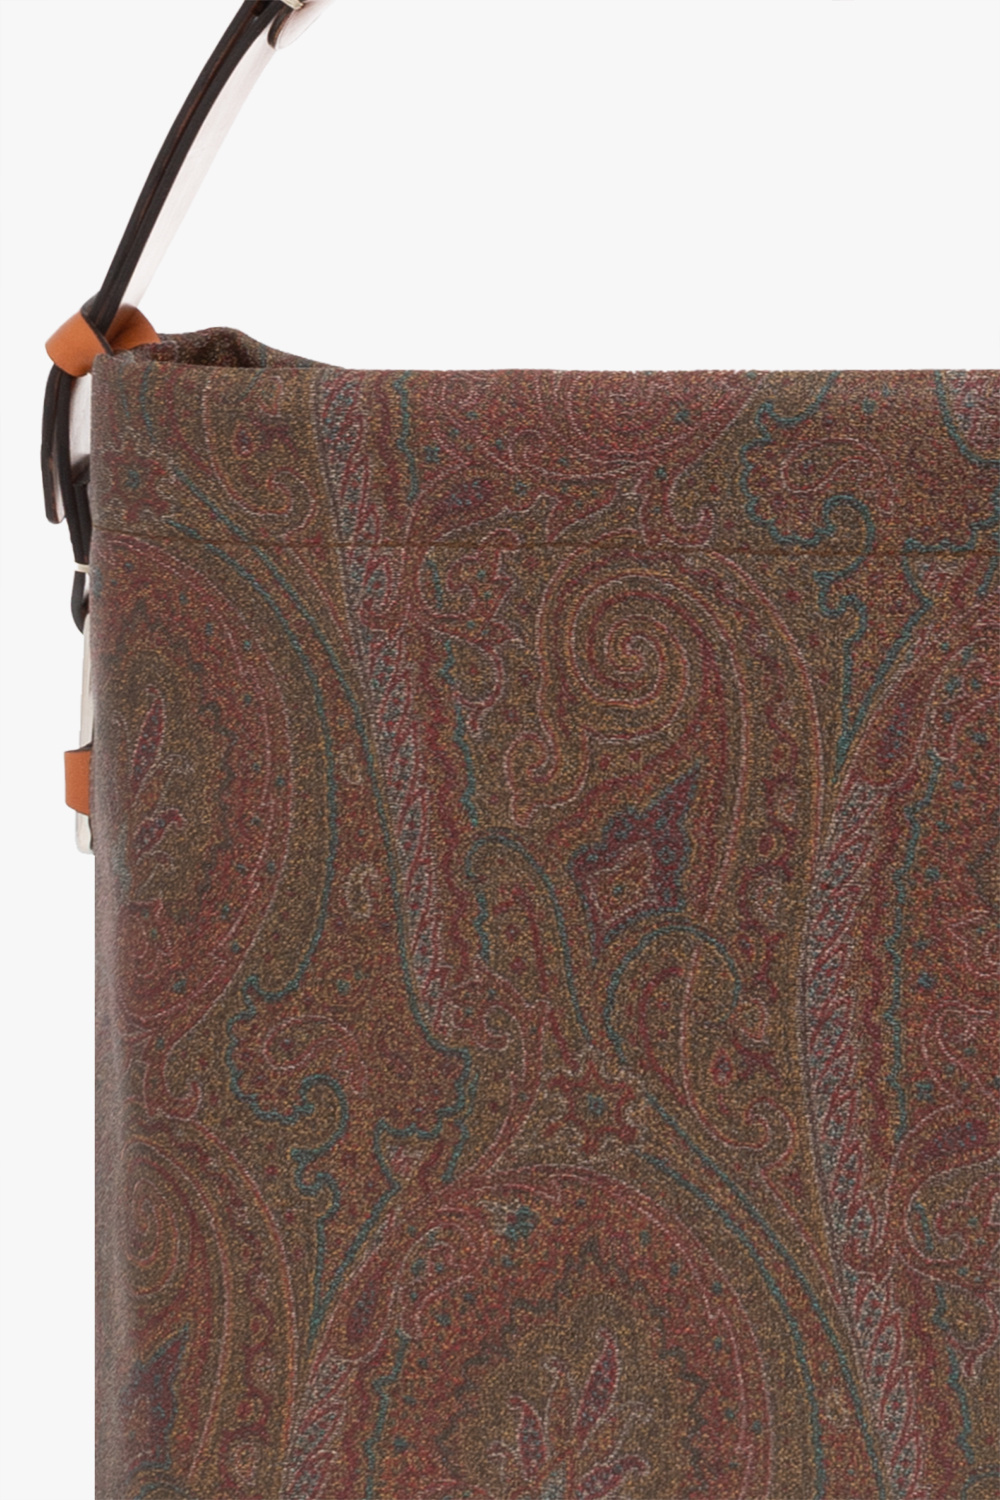 Etro there will be no race day bag check